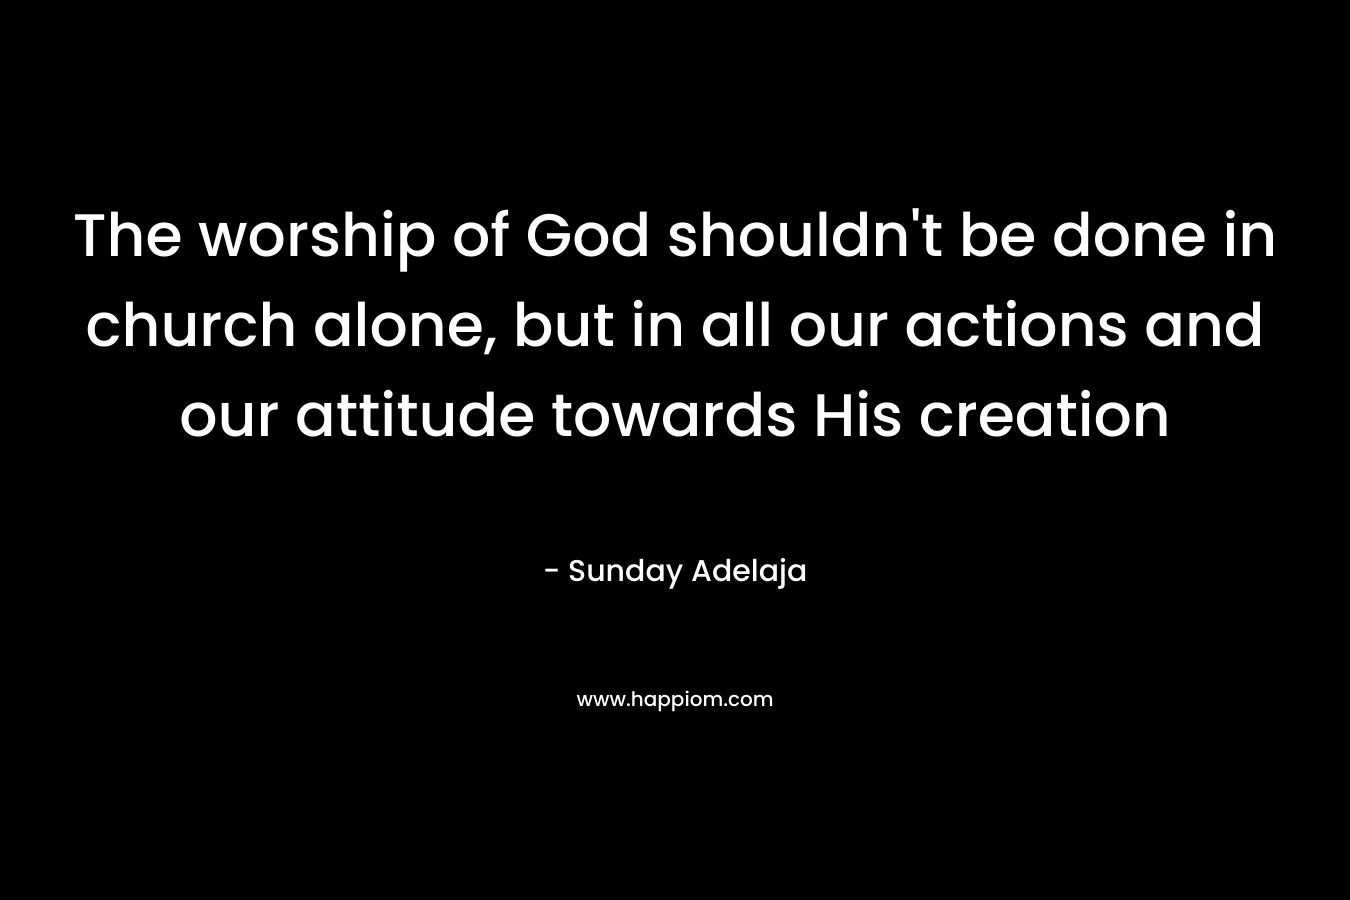 The worship of God shouldn't be done in church alone, but in all our actions and our attitude towards His creation